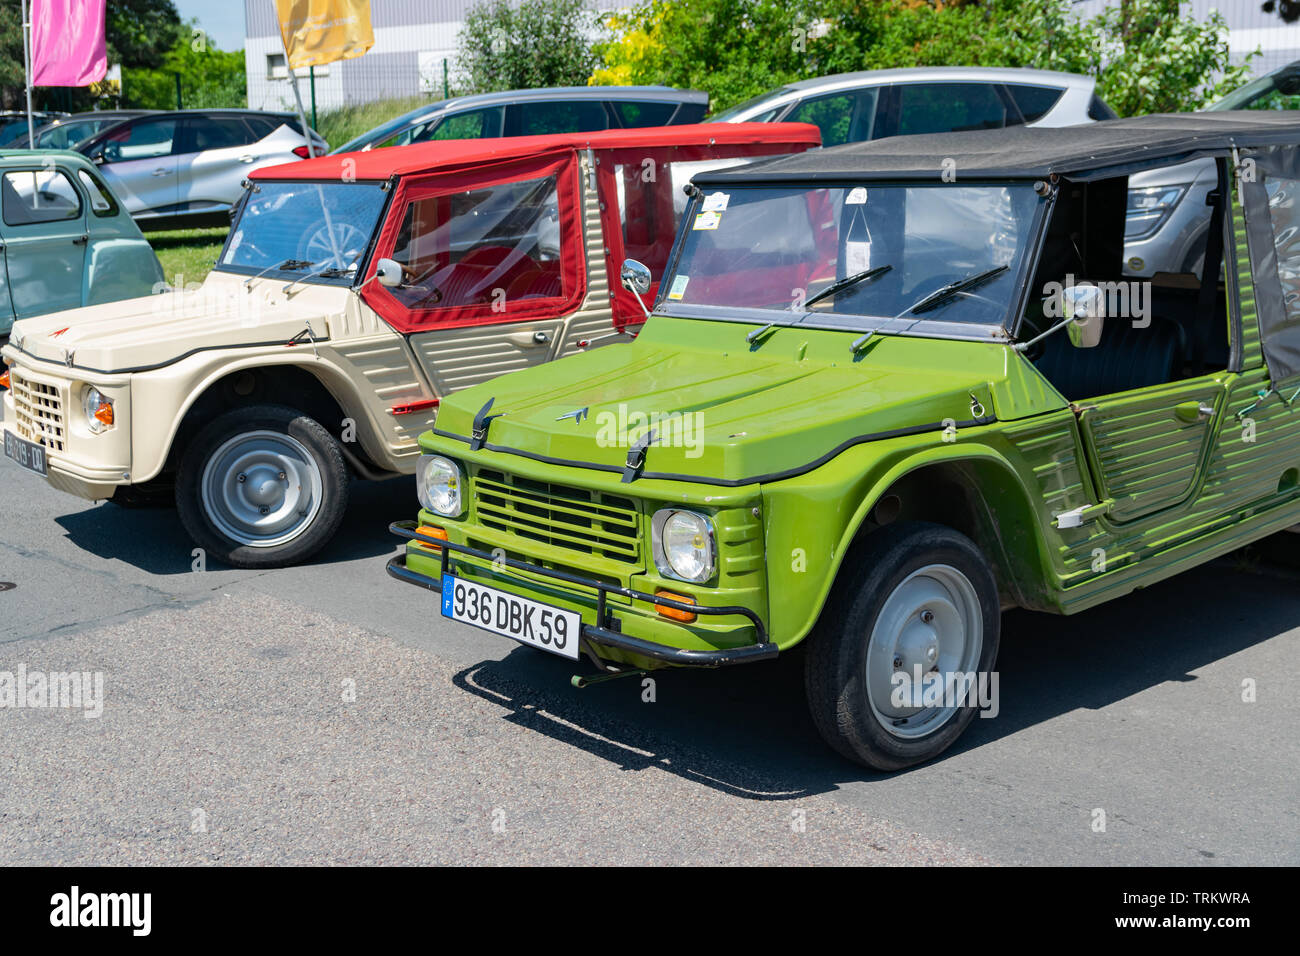 Wattrelos,FRANCE-June 02,2019: view of the Citroën Méhari,car exhibited at the 7th Retro Car Festival at the Renault Wattrelos ZI Martinoire. Stock Photo